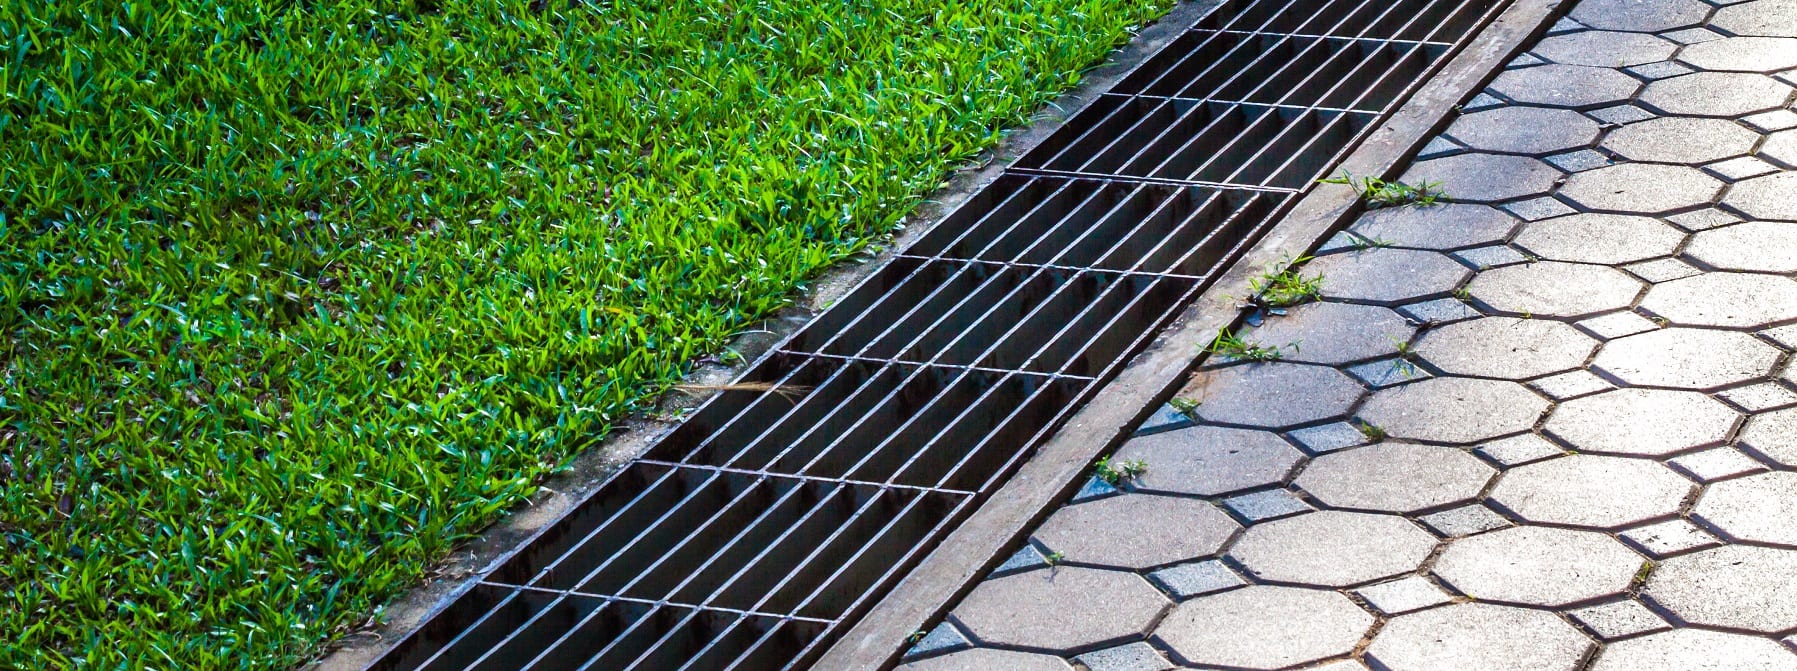 Residential Drainage Systems 101